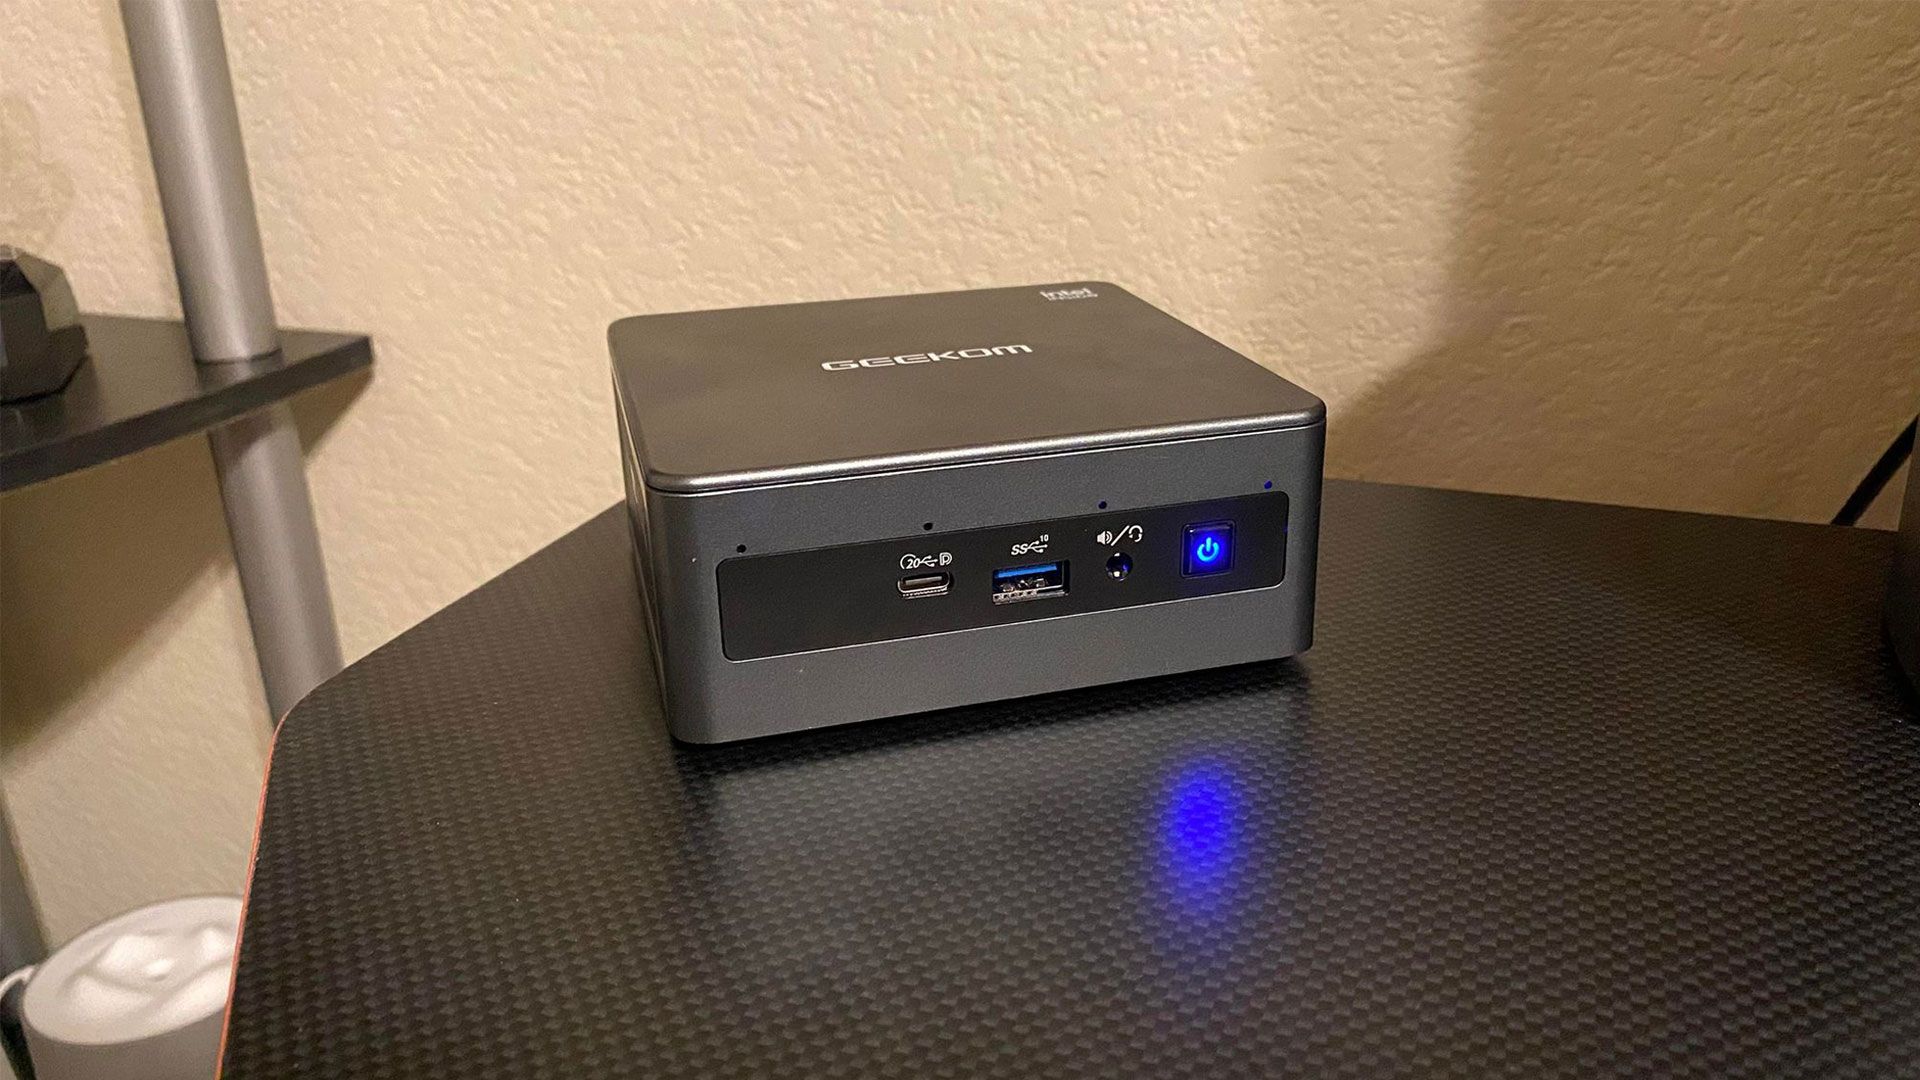 GEEKOM PC reviews AS 6 mini PC, Mark LoProto posted on the topic